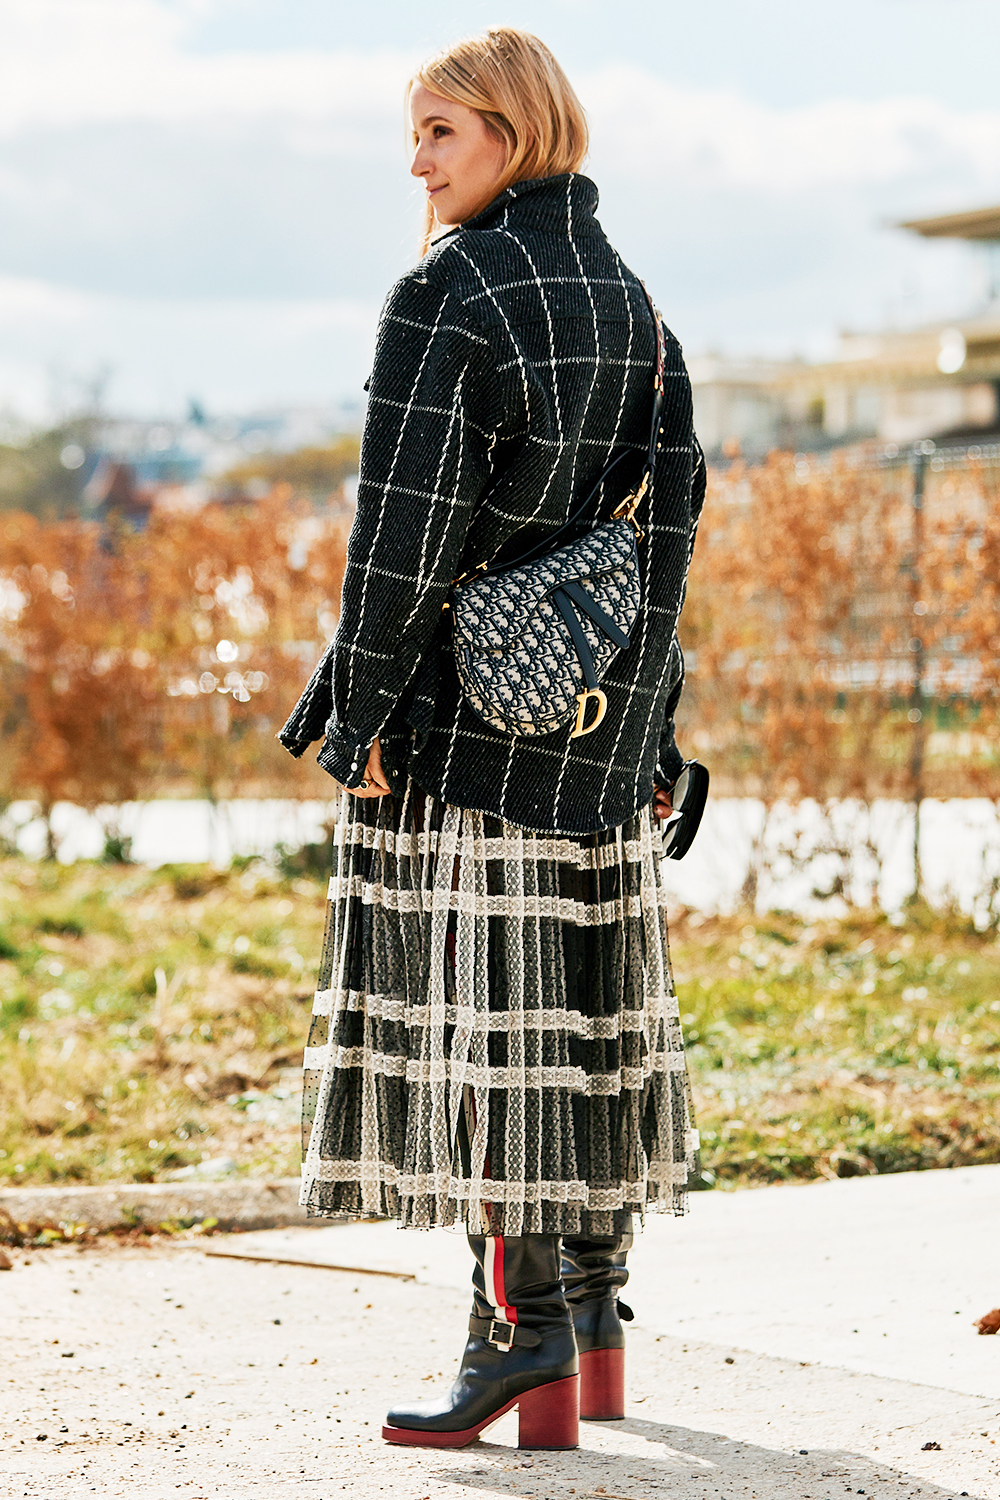 Paris Fashion Week street style October 2018: The Fashion Guitar wearing Dior skirt and jacket